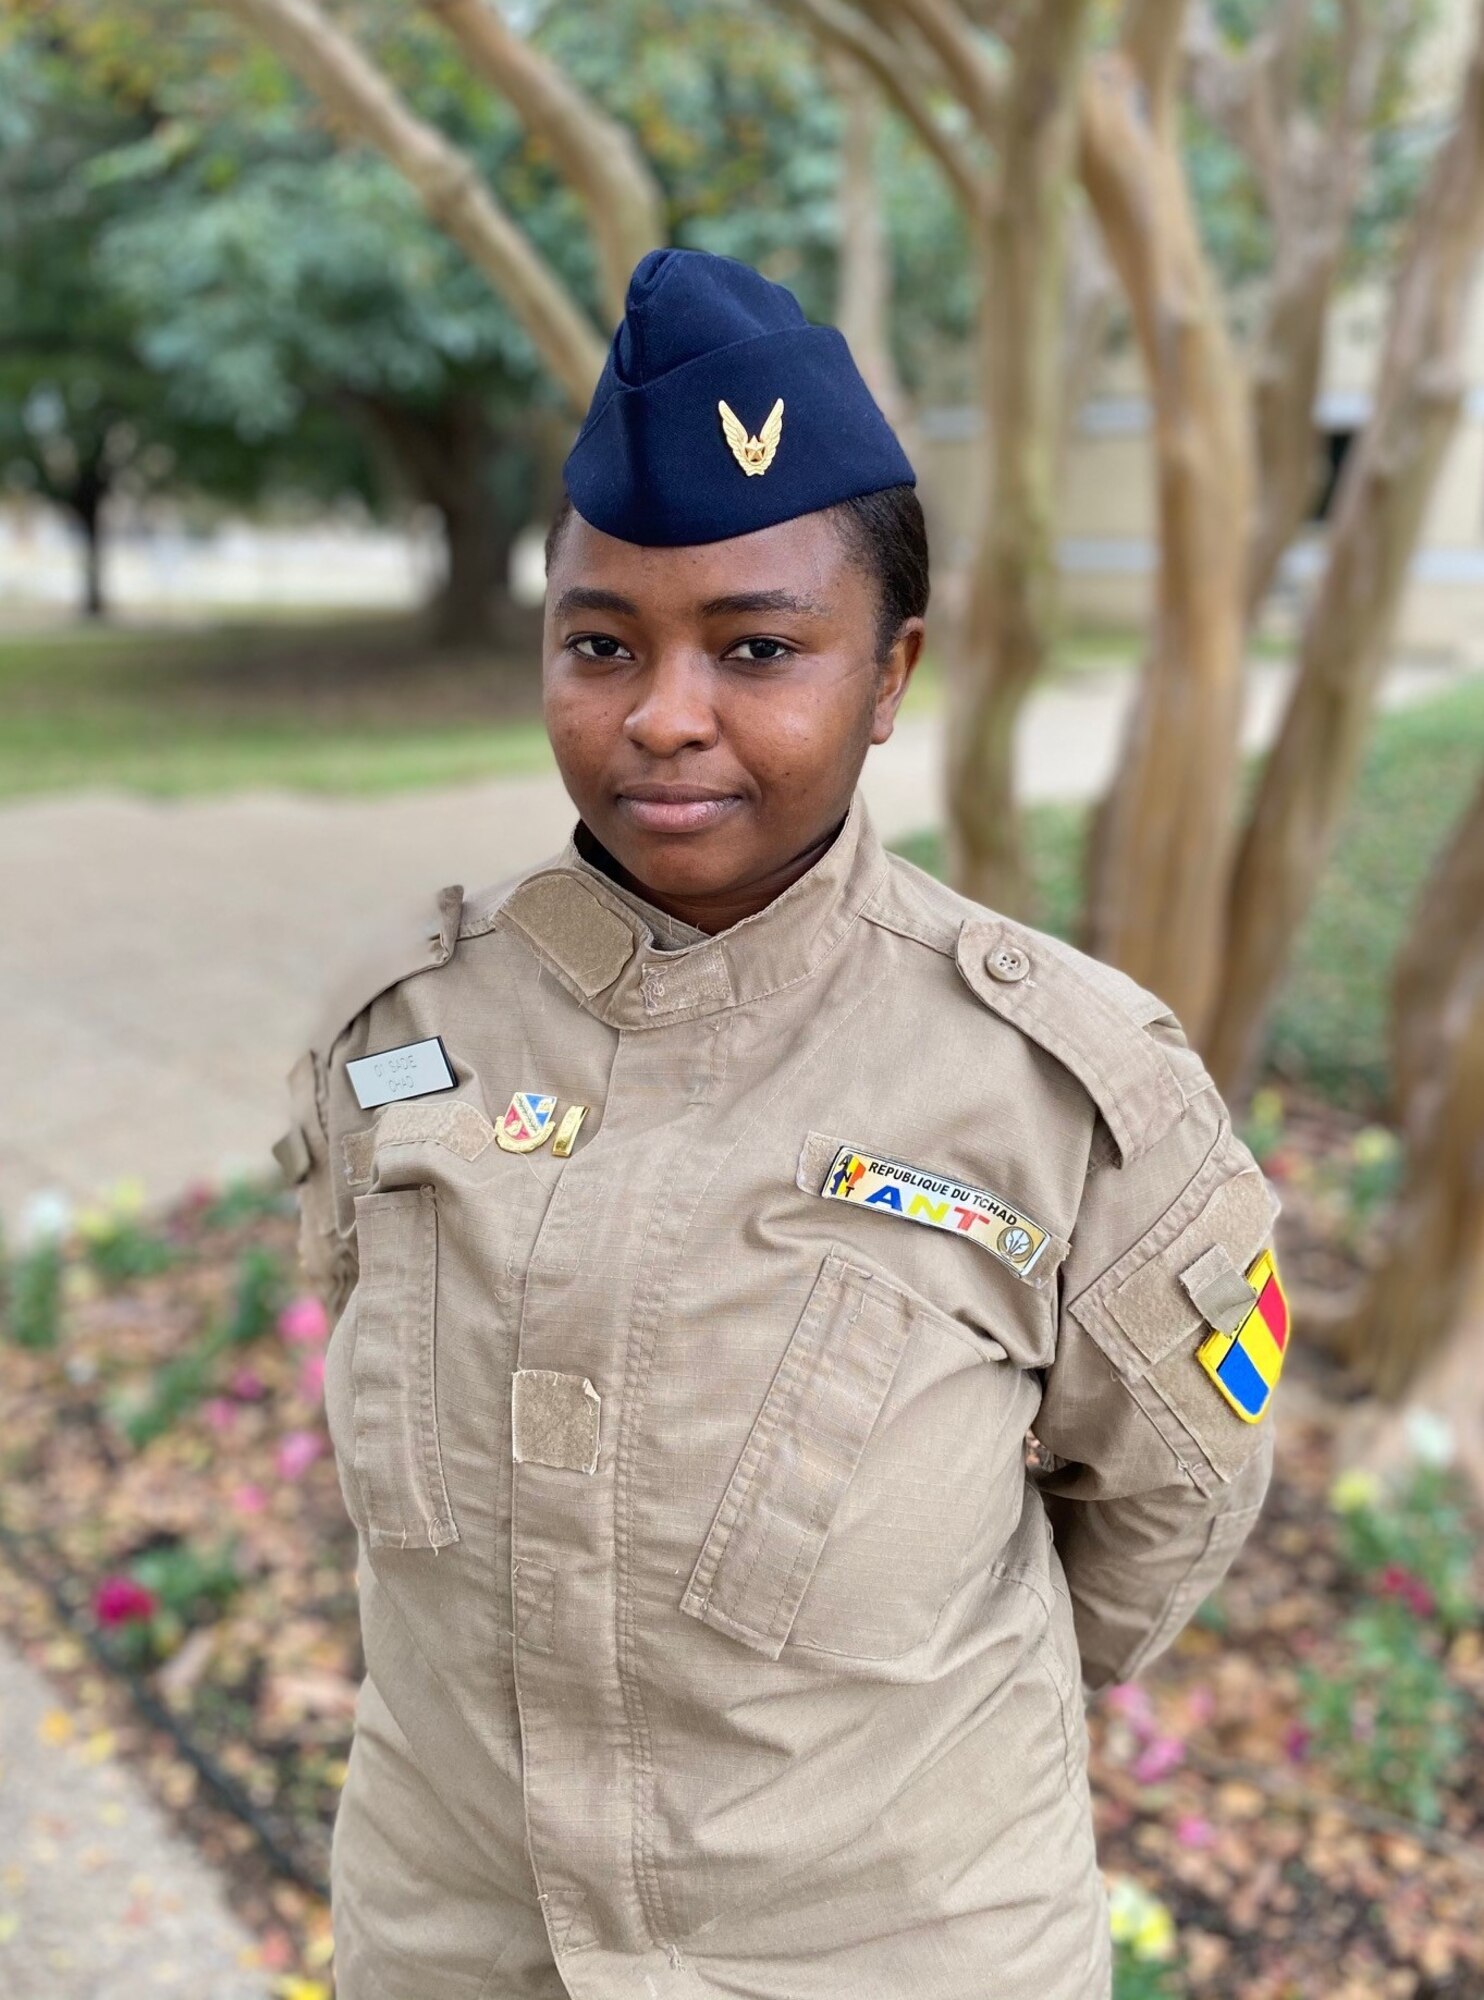 Second Lt. Ahmat Sadie of the Republic of Chad air force is one of the first two women in that service to become a pilot.